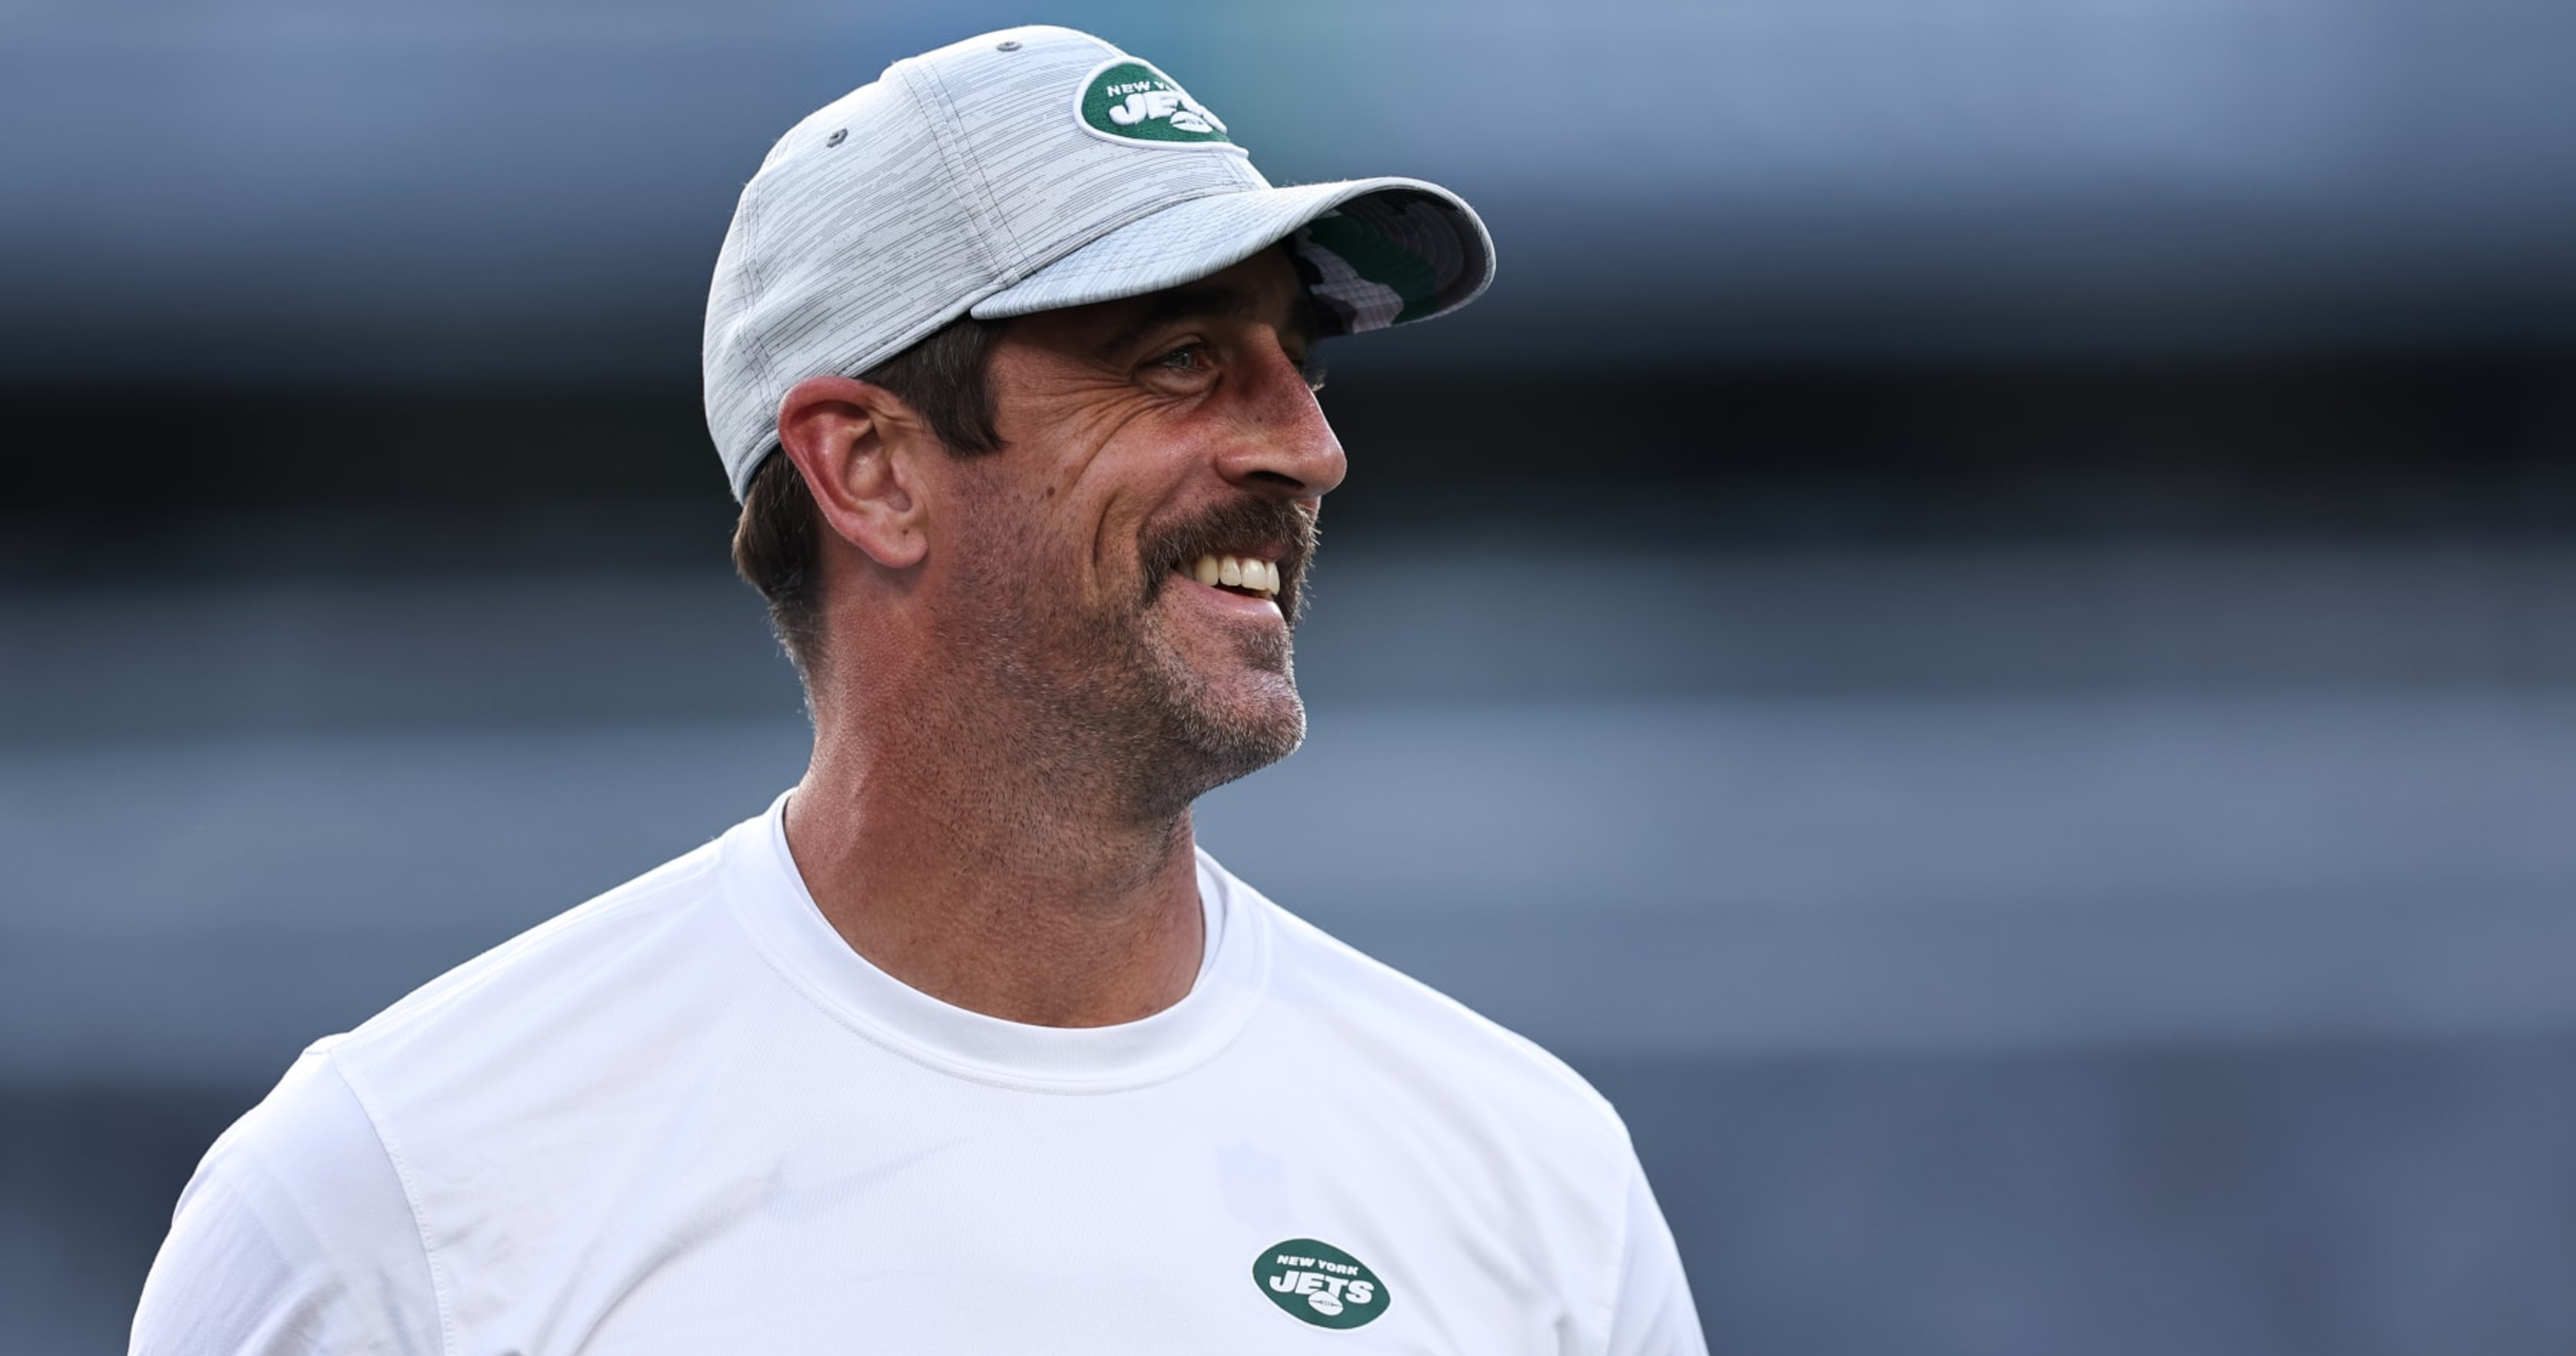 2023 NFL season: Early game predictions for 2023 Jets season